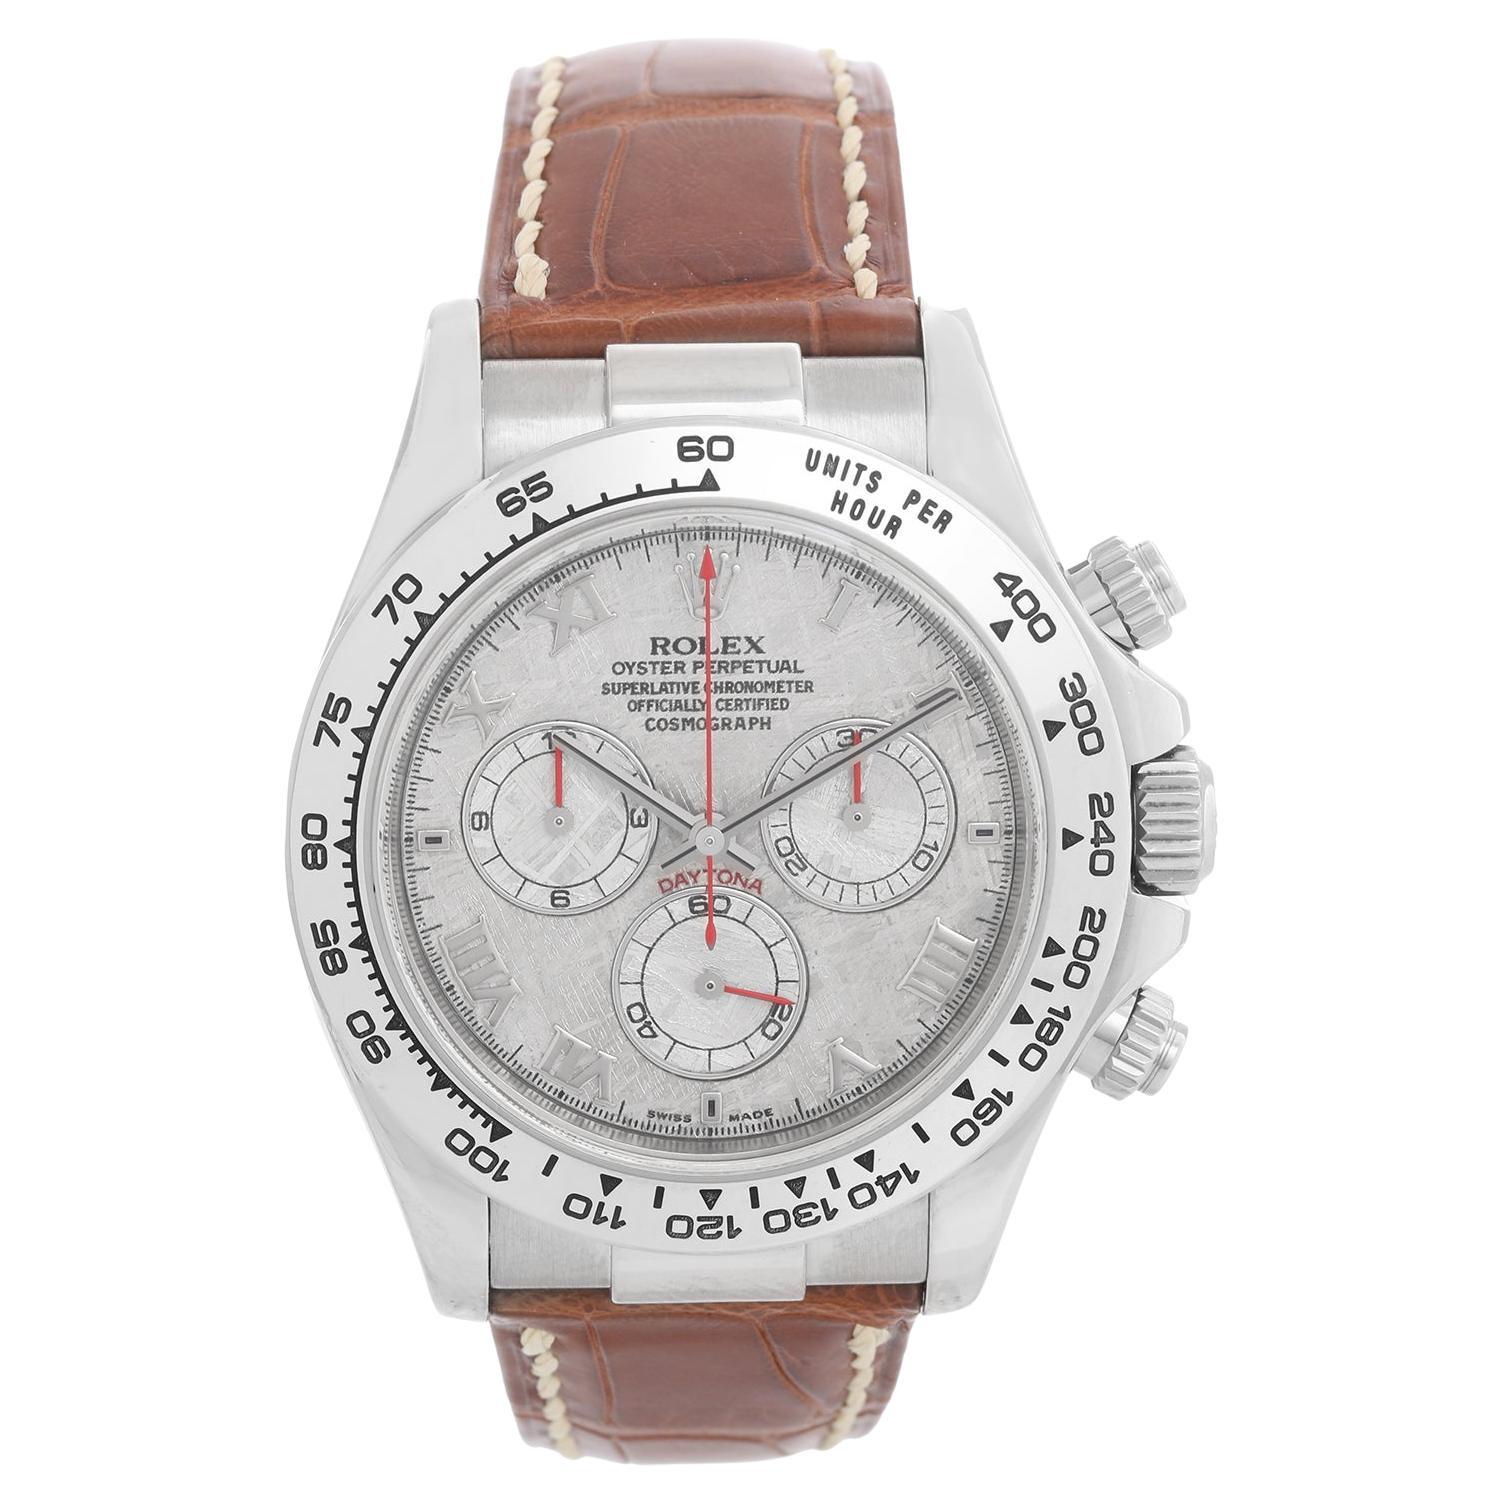 Rolex Cosmograph Daytona Men's 18k White Gold Watch 116509 For Sale at ...